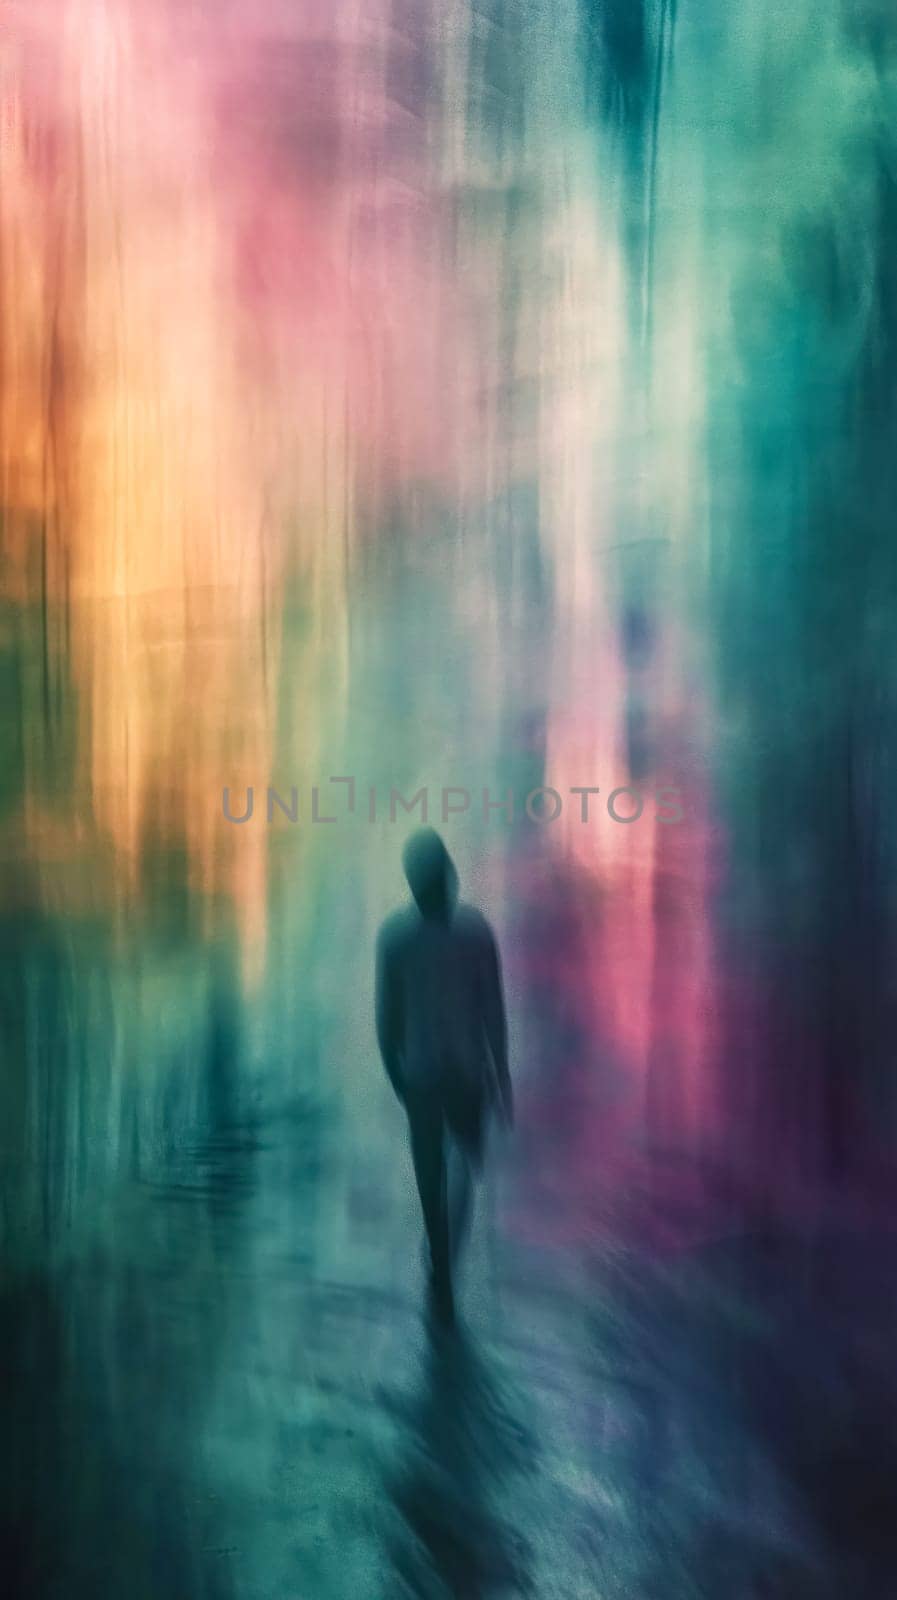 solitary figure walking in an abstract, brushstroke-like environment with a blend of teal, pink, and orange hues blurred, painting-like effect that evokes a sense of movement and emotional depth